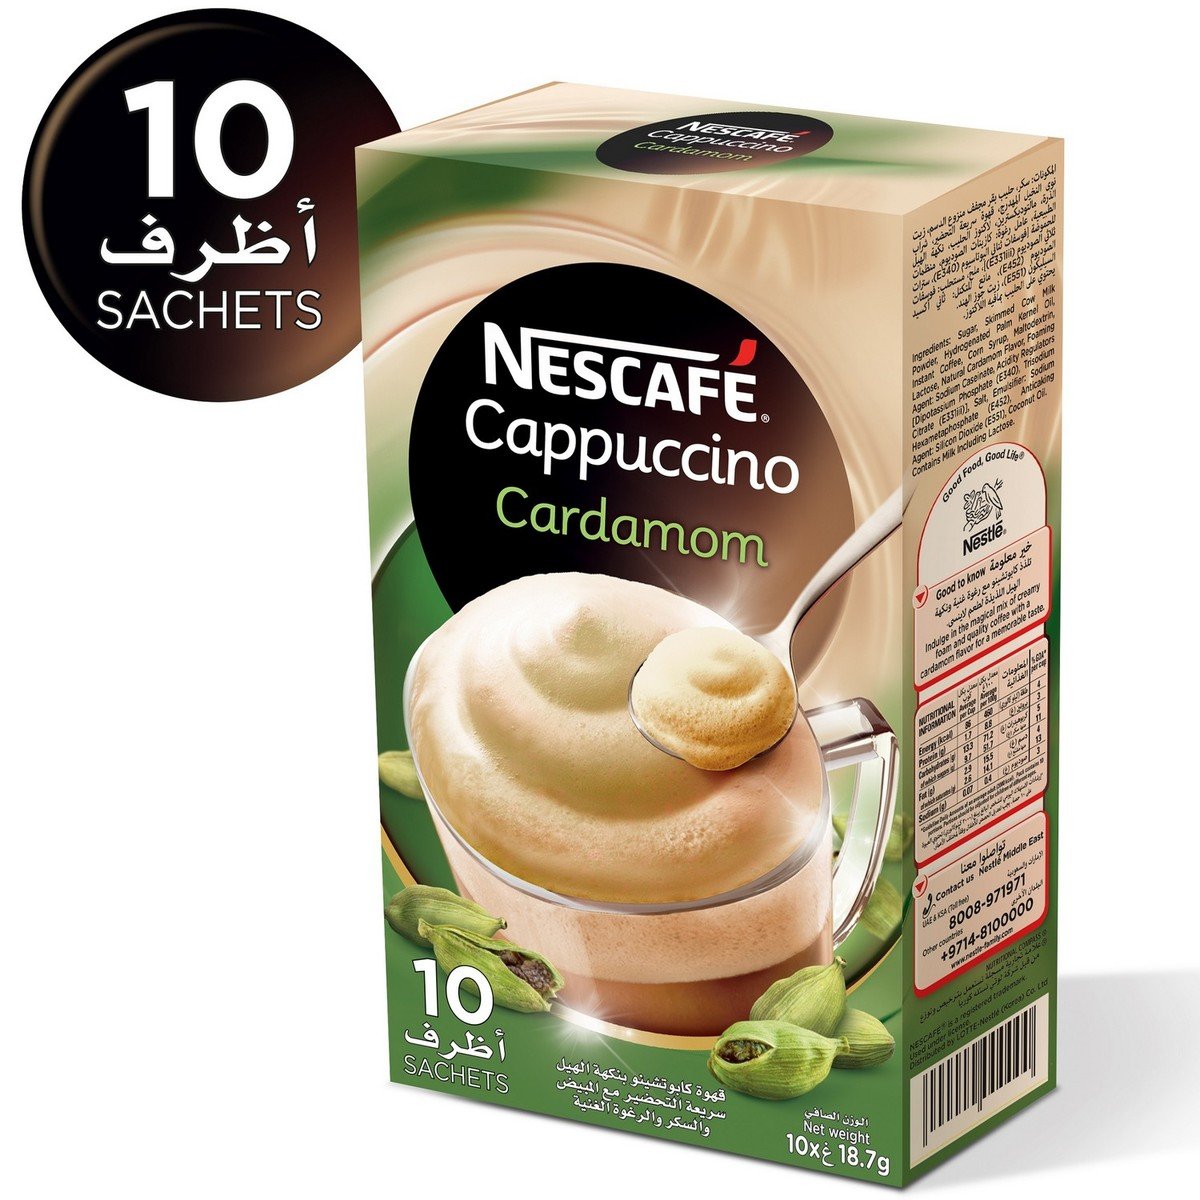 Nescafe Cappuccino With Cardamom Foaming Mix Coffee 18.7g Sachet X 10 Pieces